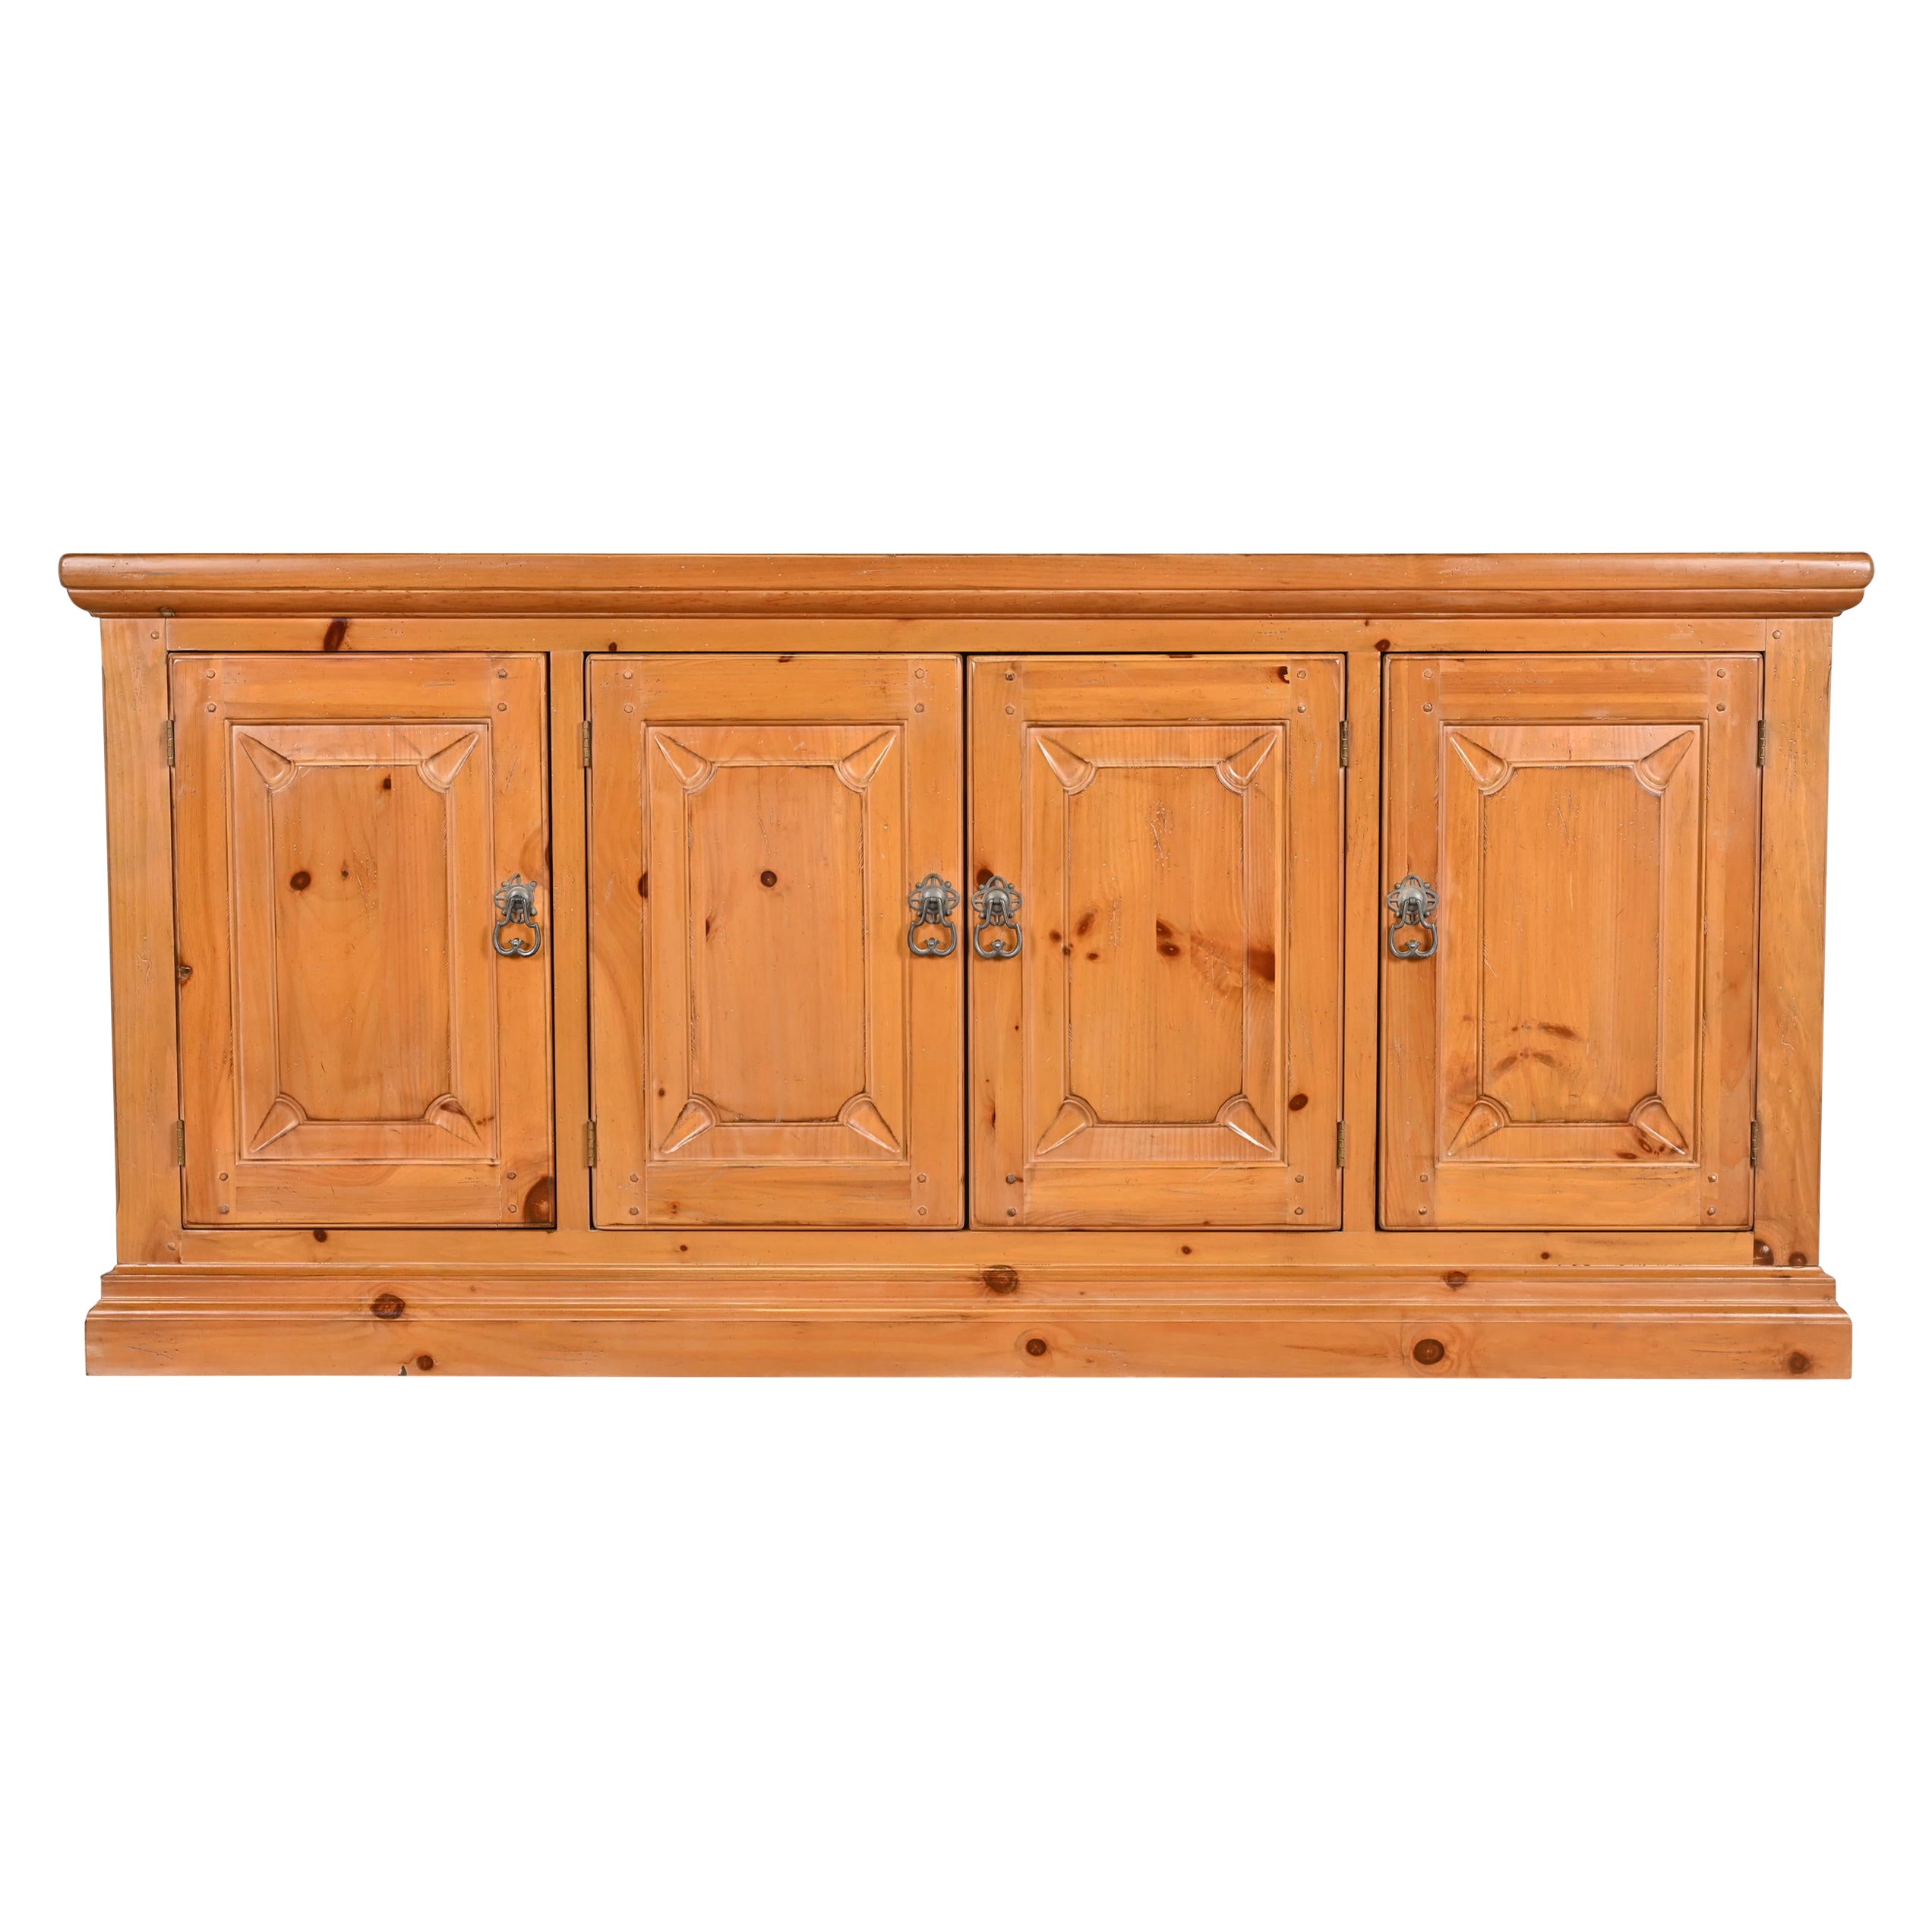 Drexel Heritage Spanish Colonial Solid Pine Sideboard or Bar Cabinet